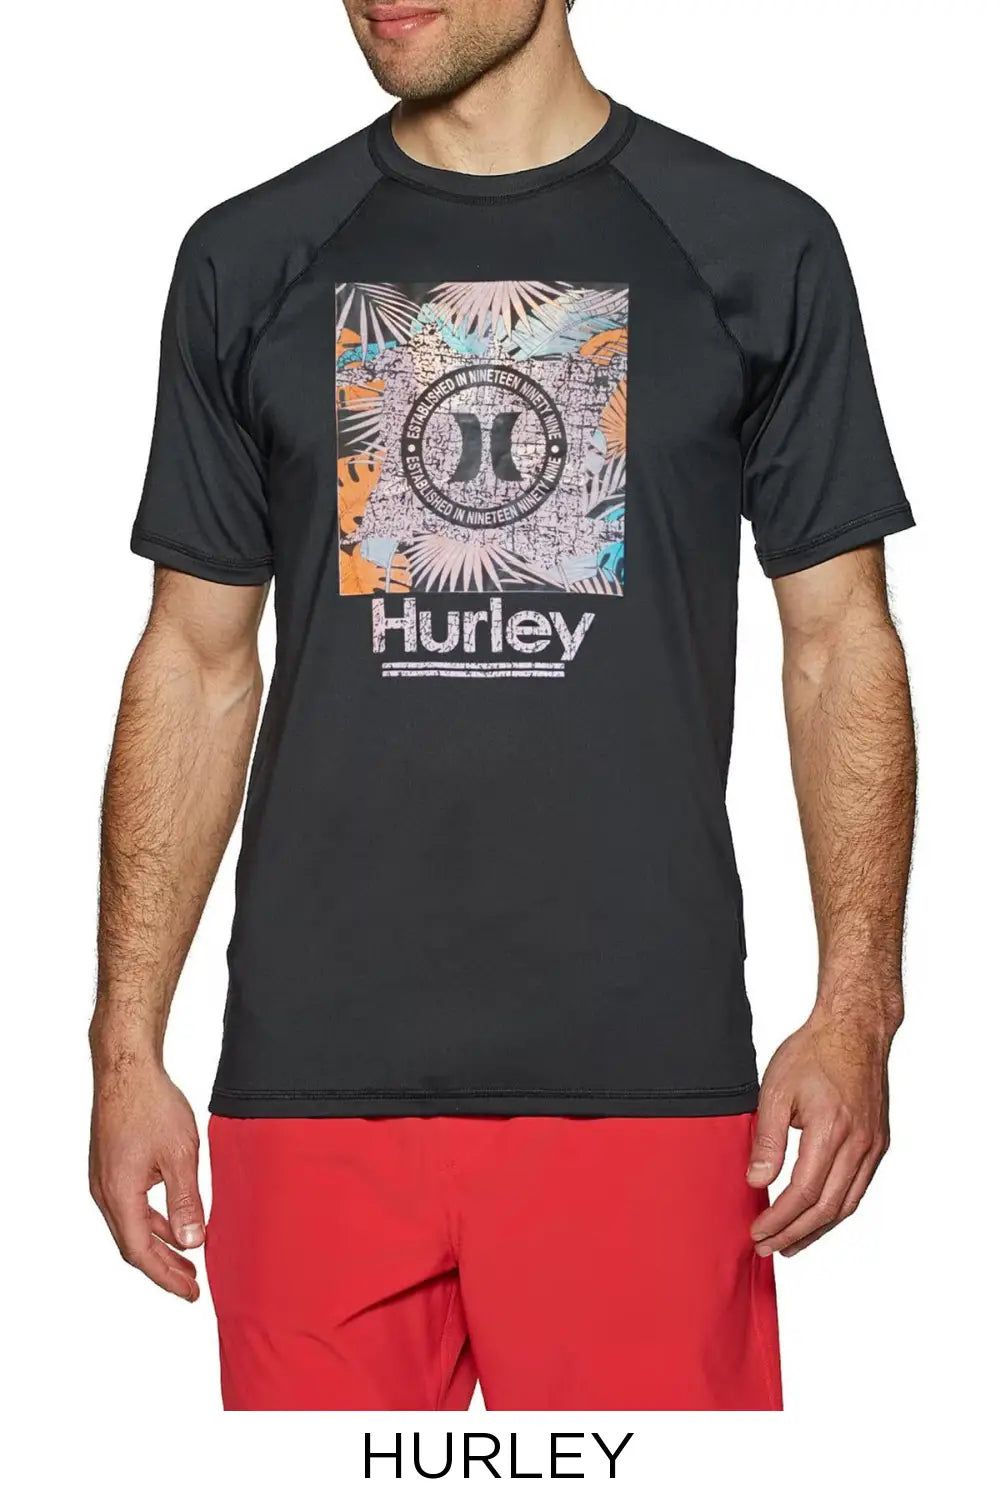 Hurley Surf Water sports T-Shirt Black 4 / S